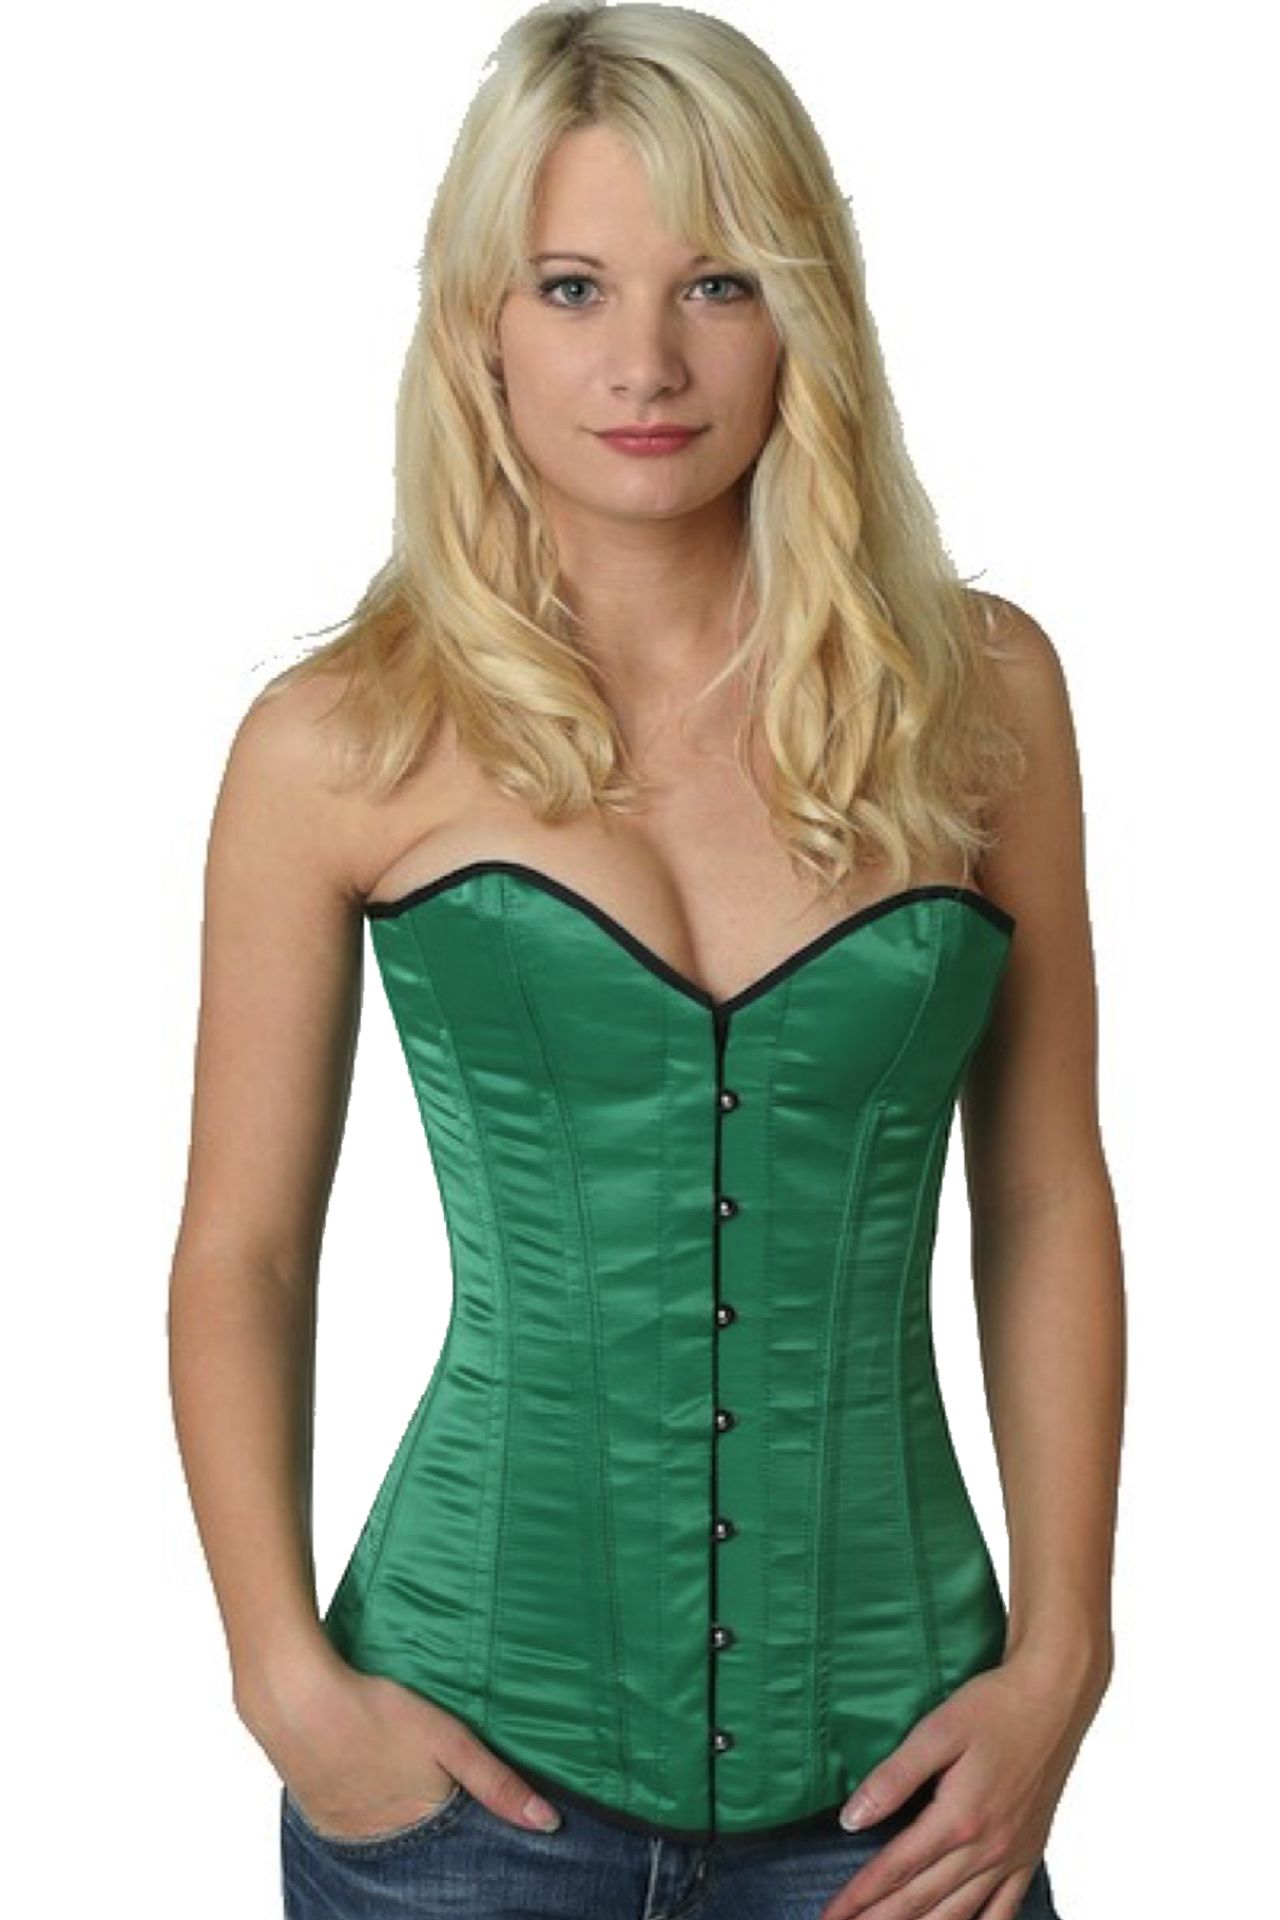 Corset green satin overbust sy14